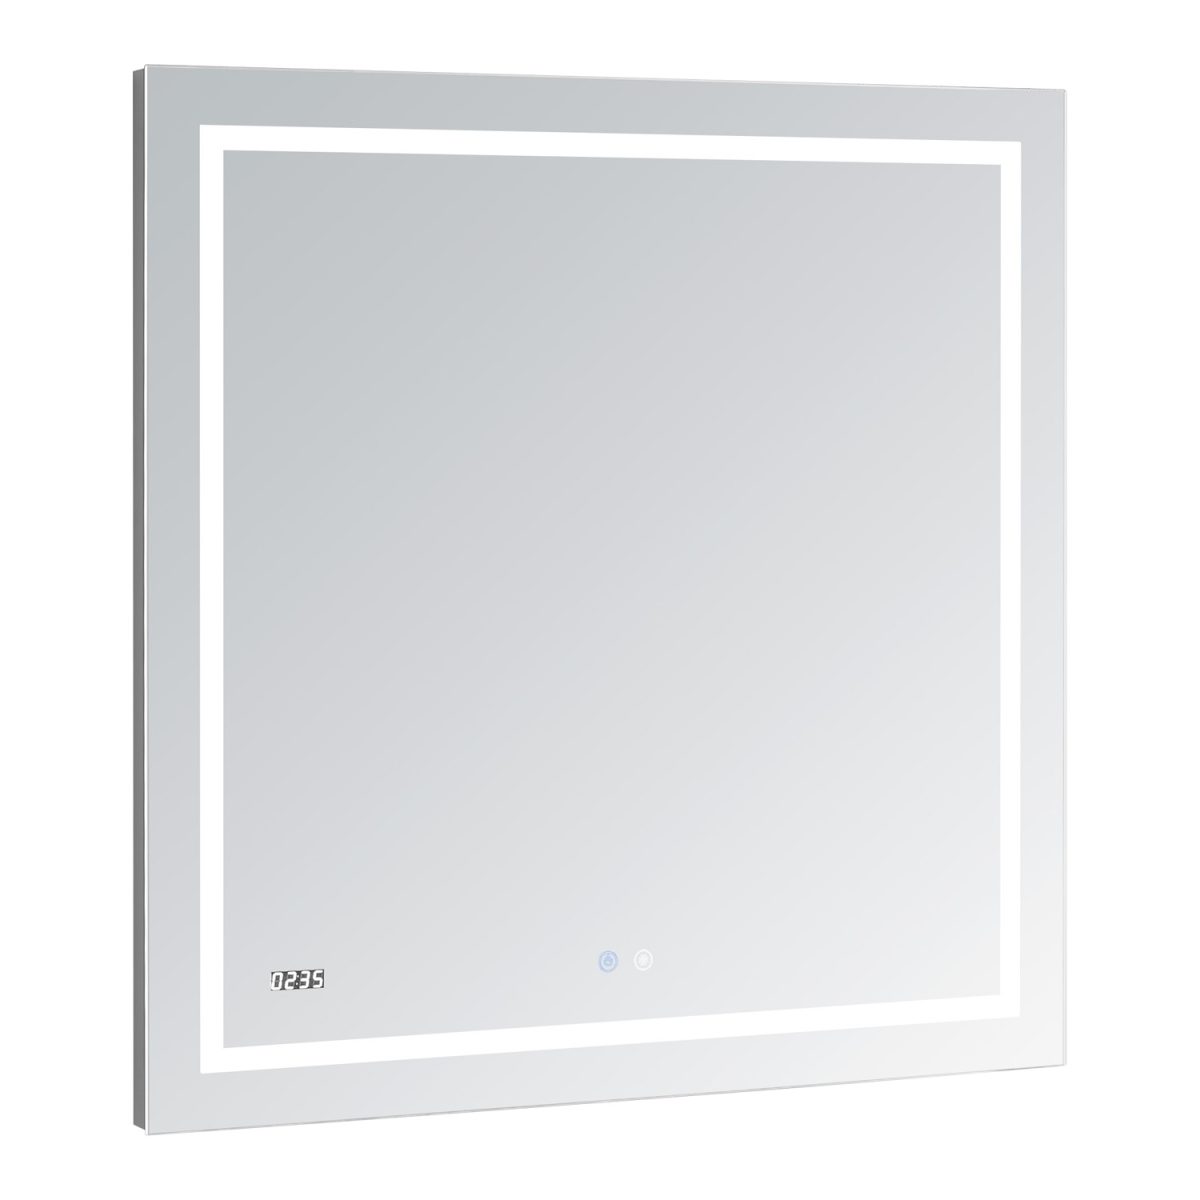 AQUADOM Daytona 30 inches x 30 inches Wall Mounted LED Lighted Silver Mirror for Bathroom